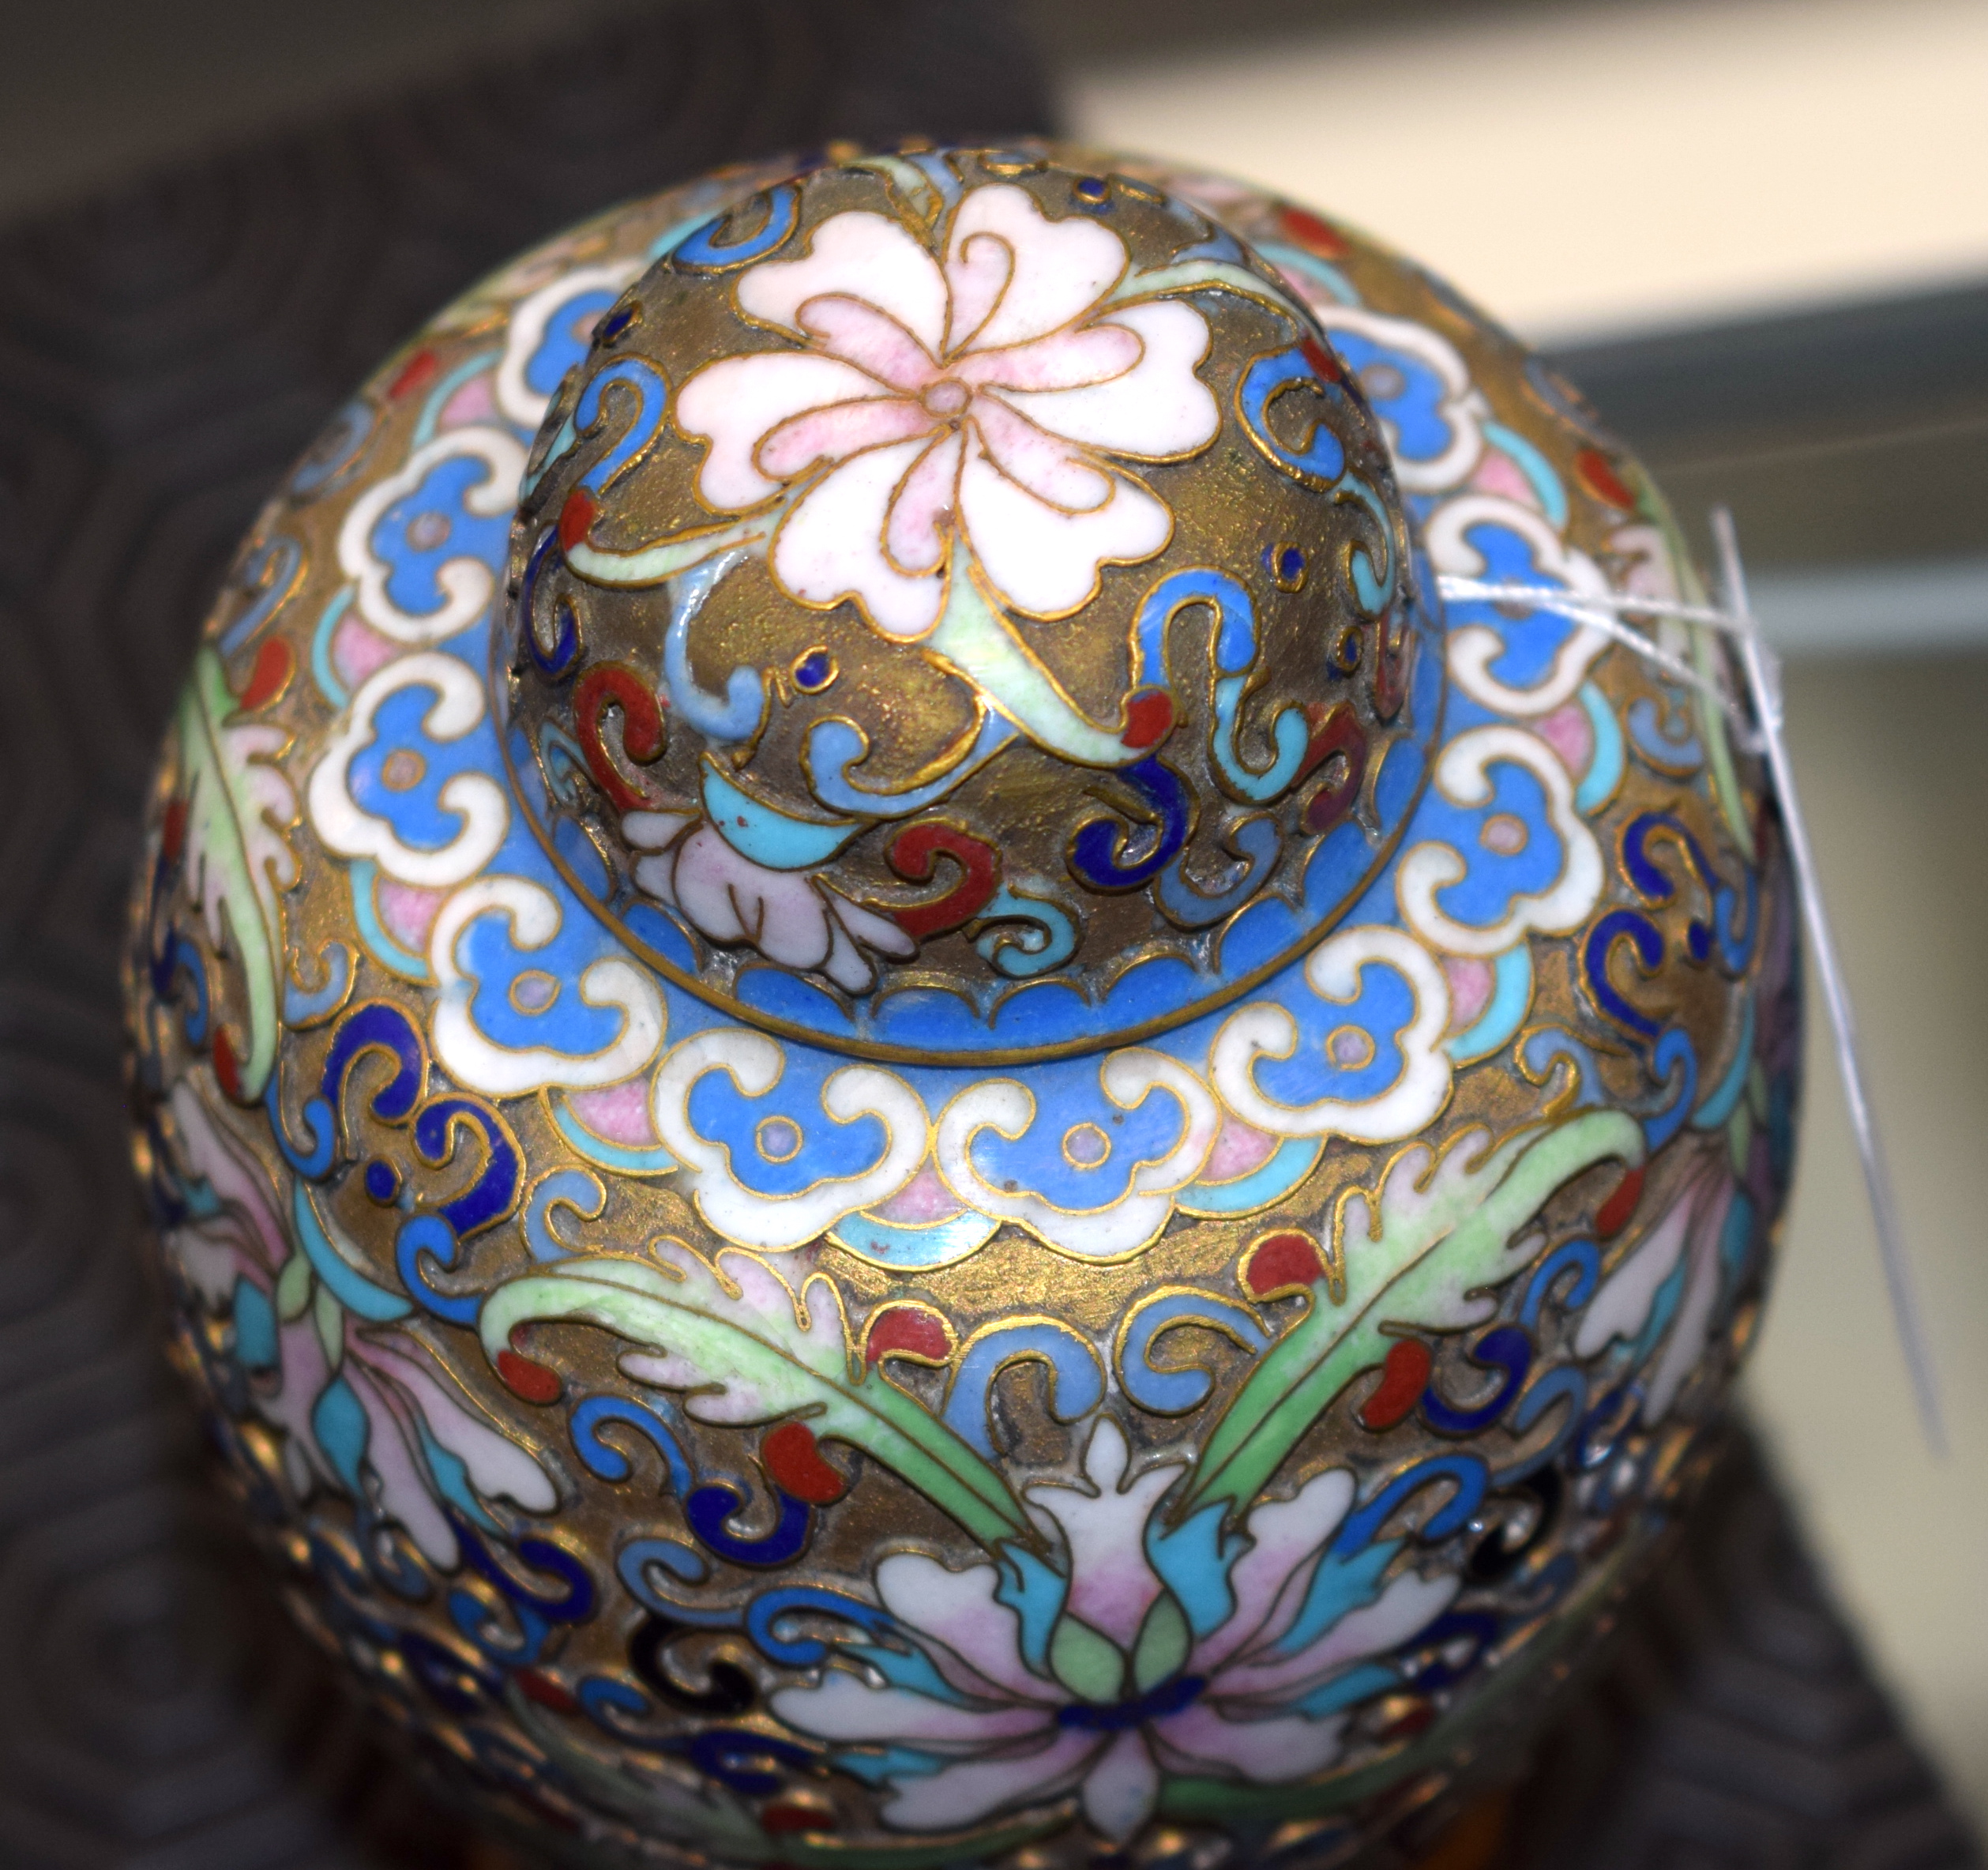 AN EARLY 20TH CENTURY CHINESE CLOISONNE ENAMEL VASE AND COVER together with a Peking style vase. La - Image 10 of 10